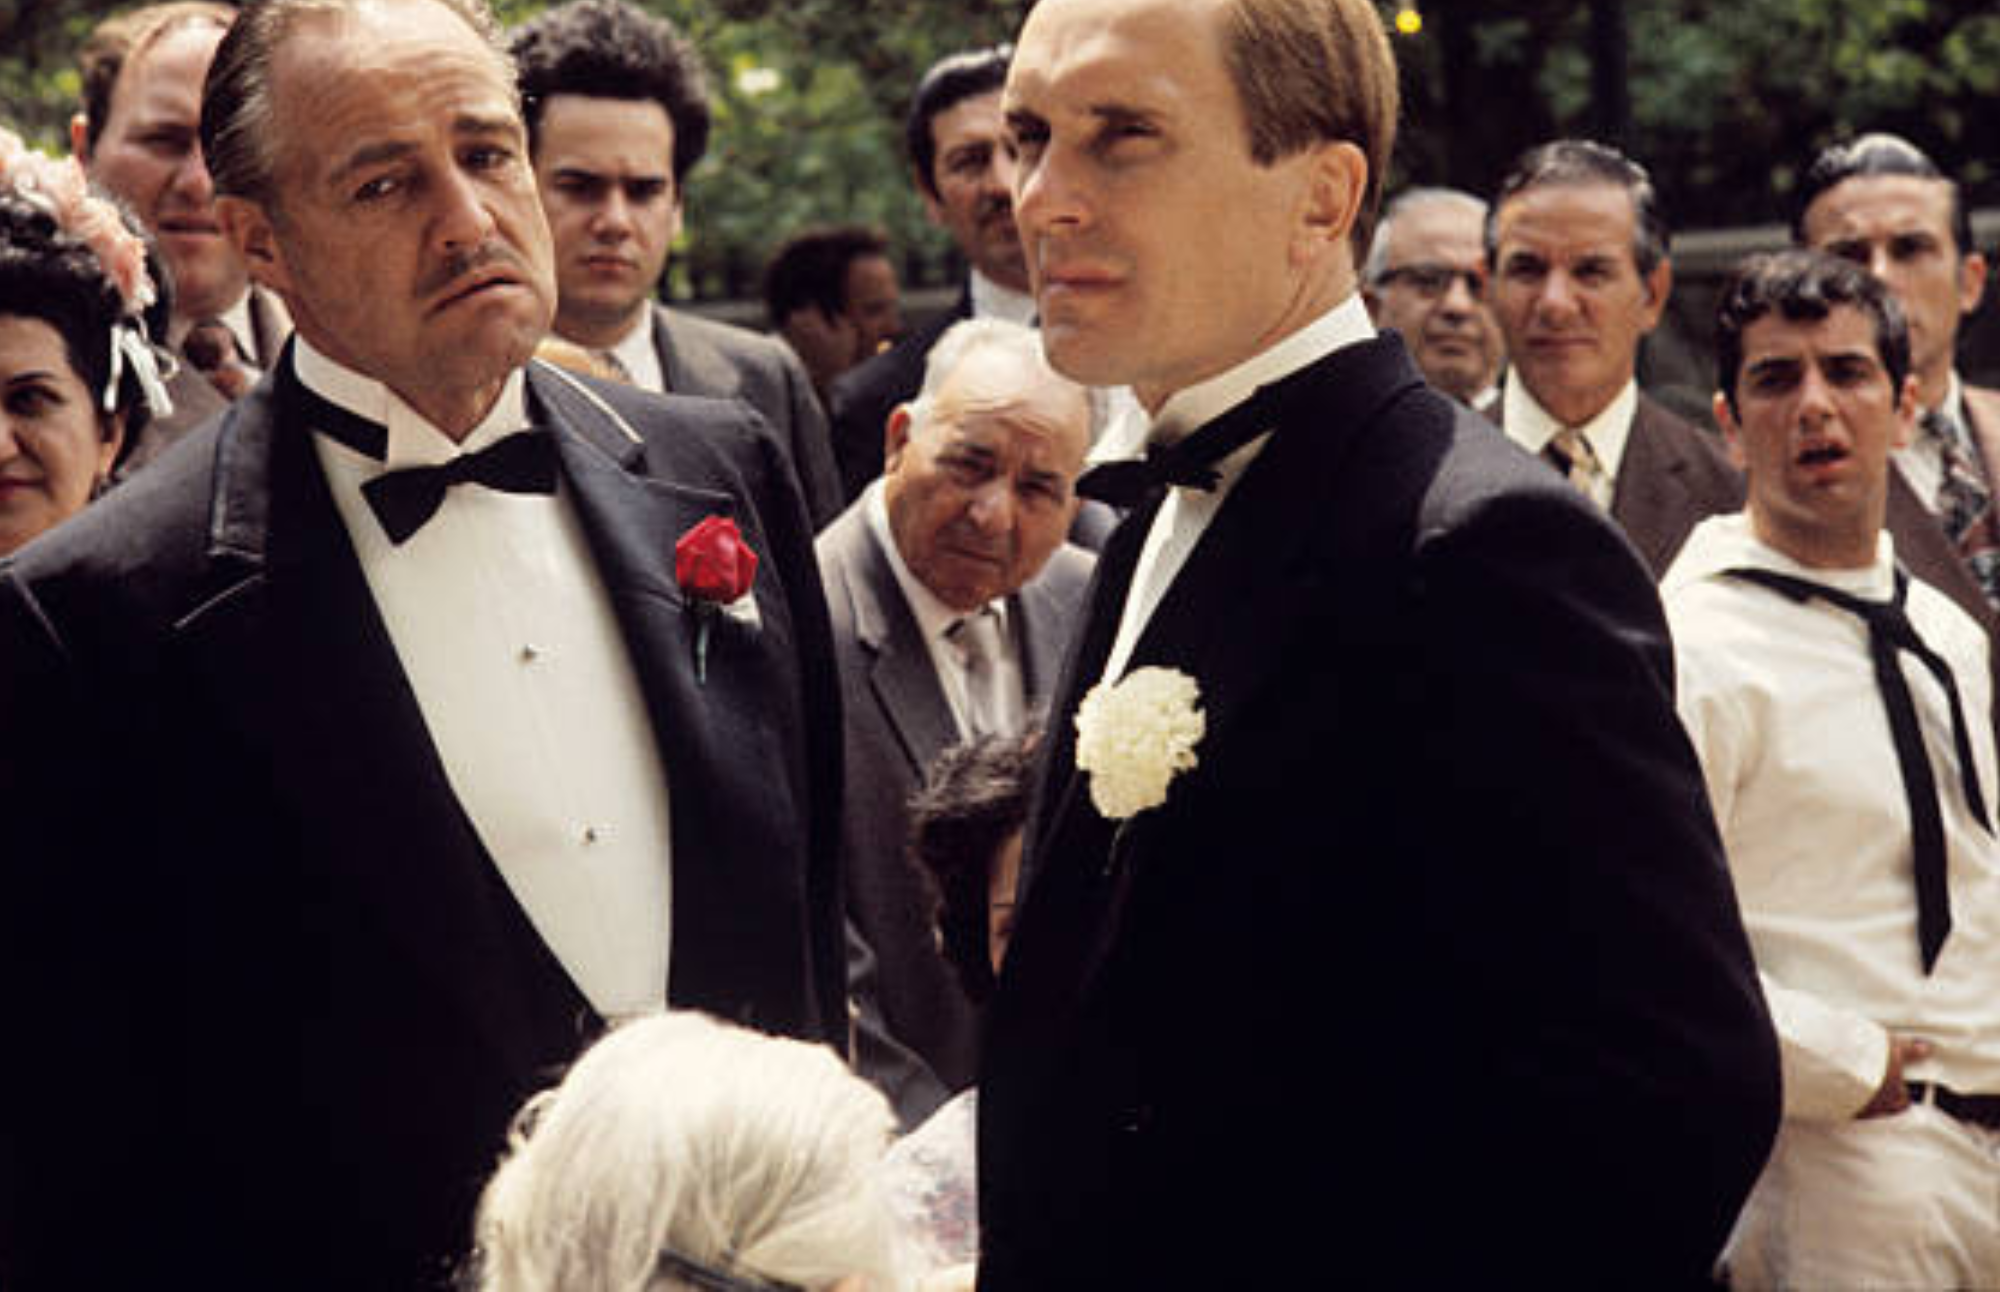 A image with Vito Corleone talking to Tom Hagen